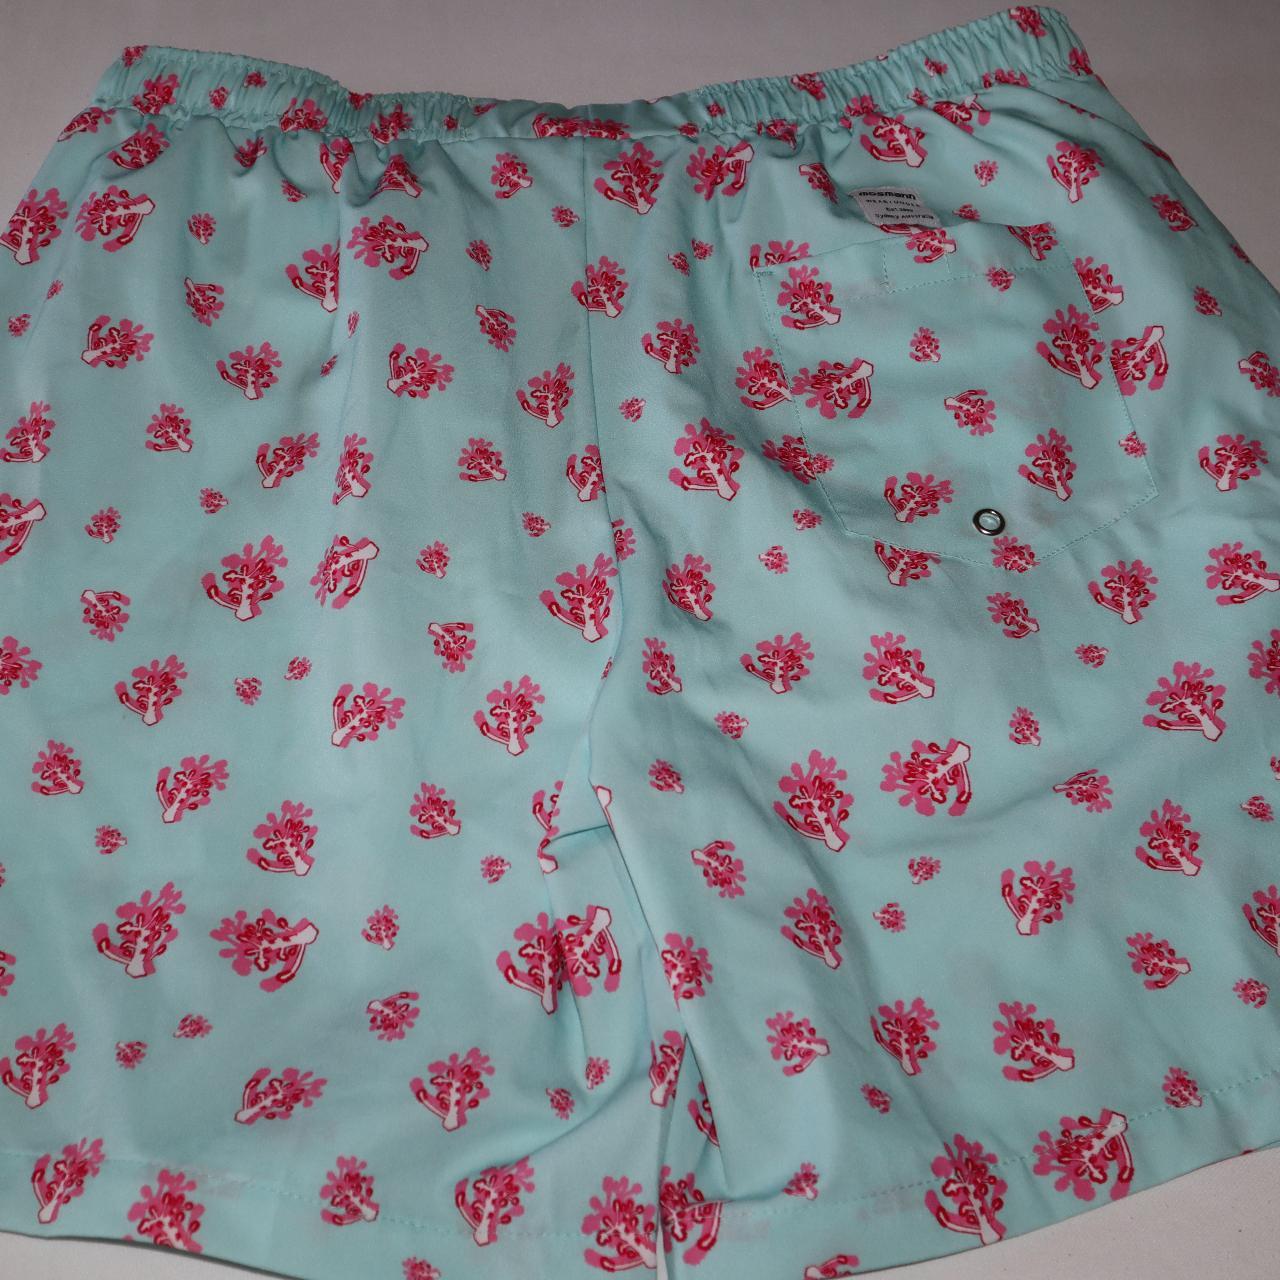 Product Image 3 - Pink Flowers Beach shorts

Size: XL

Please